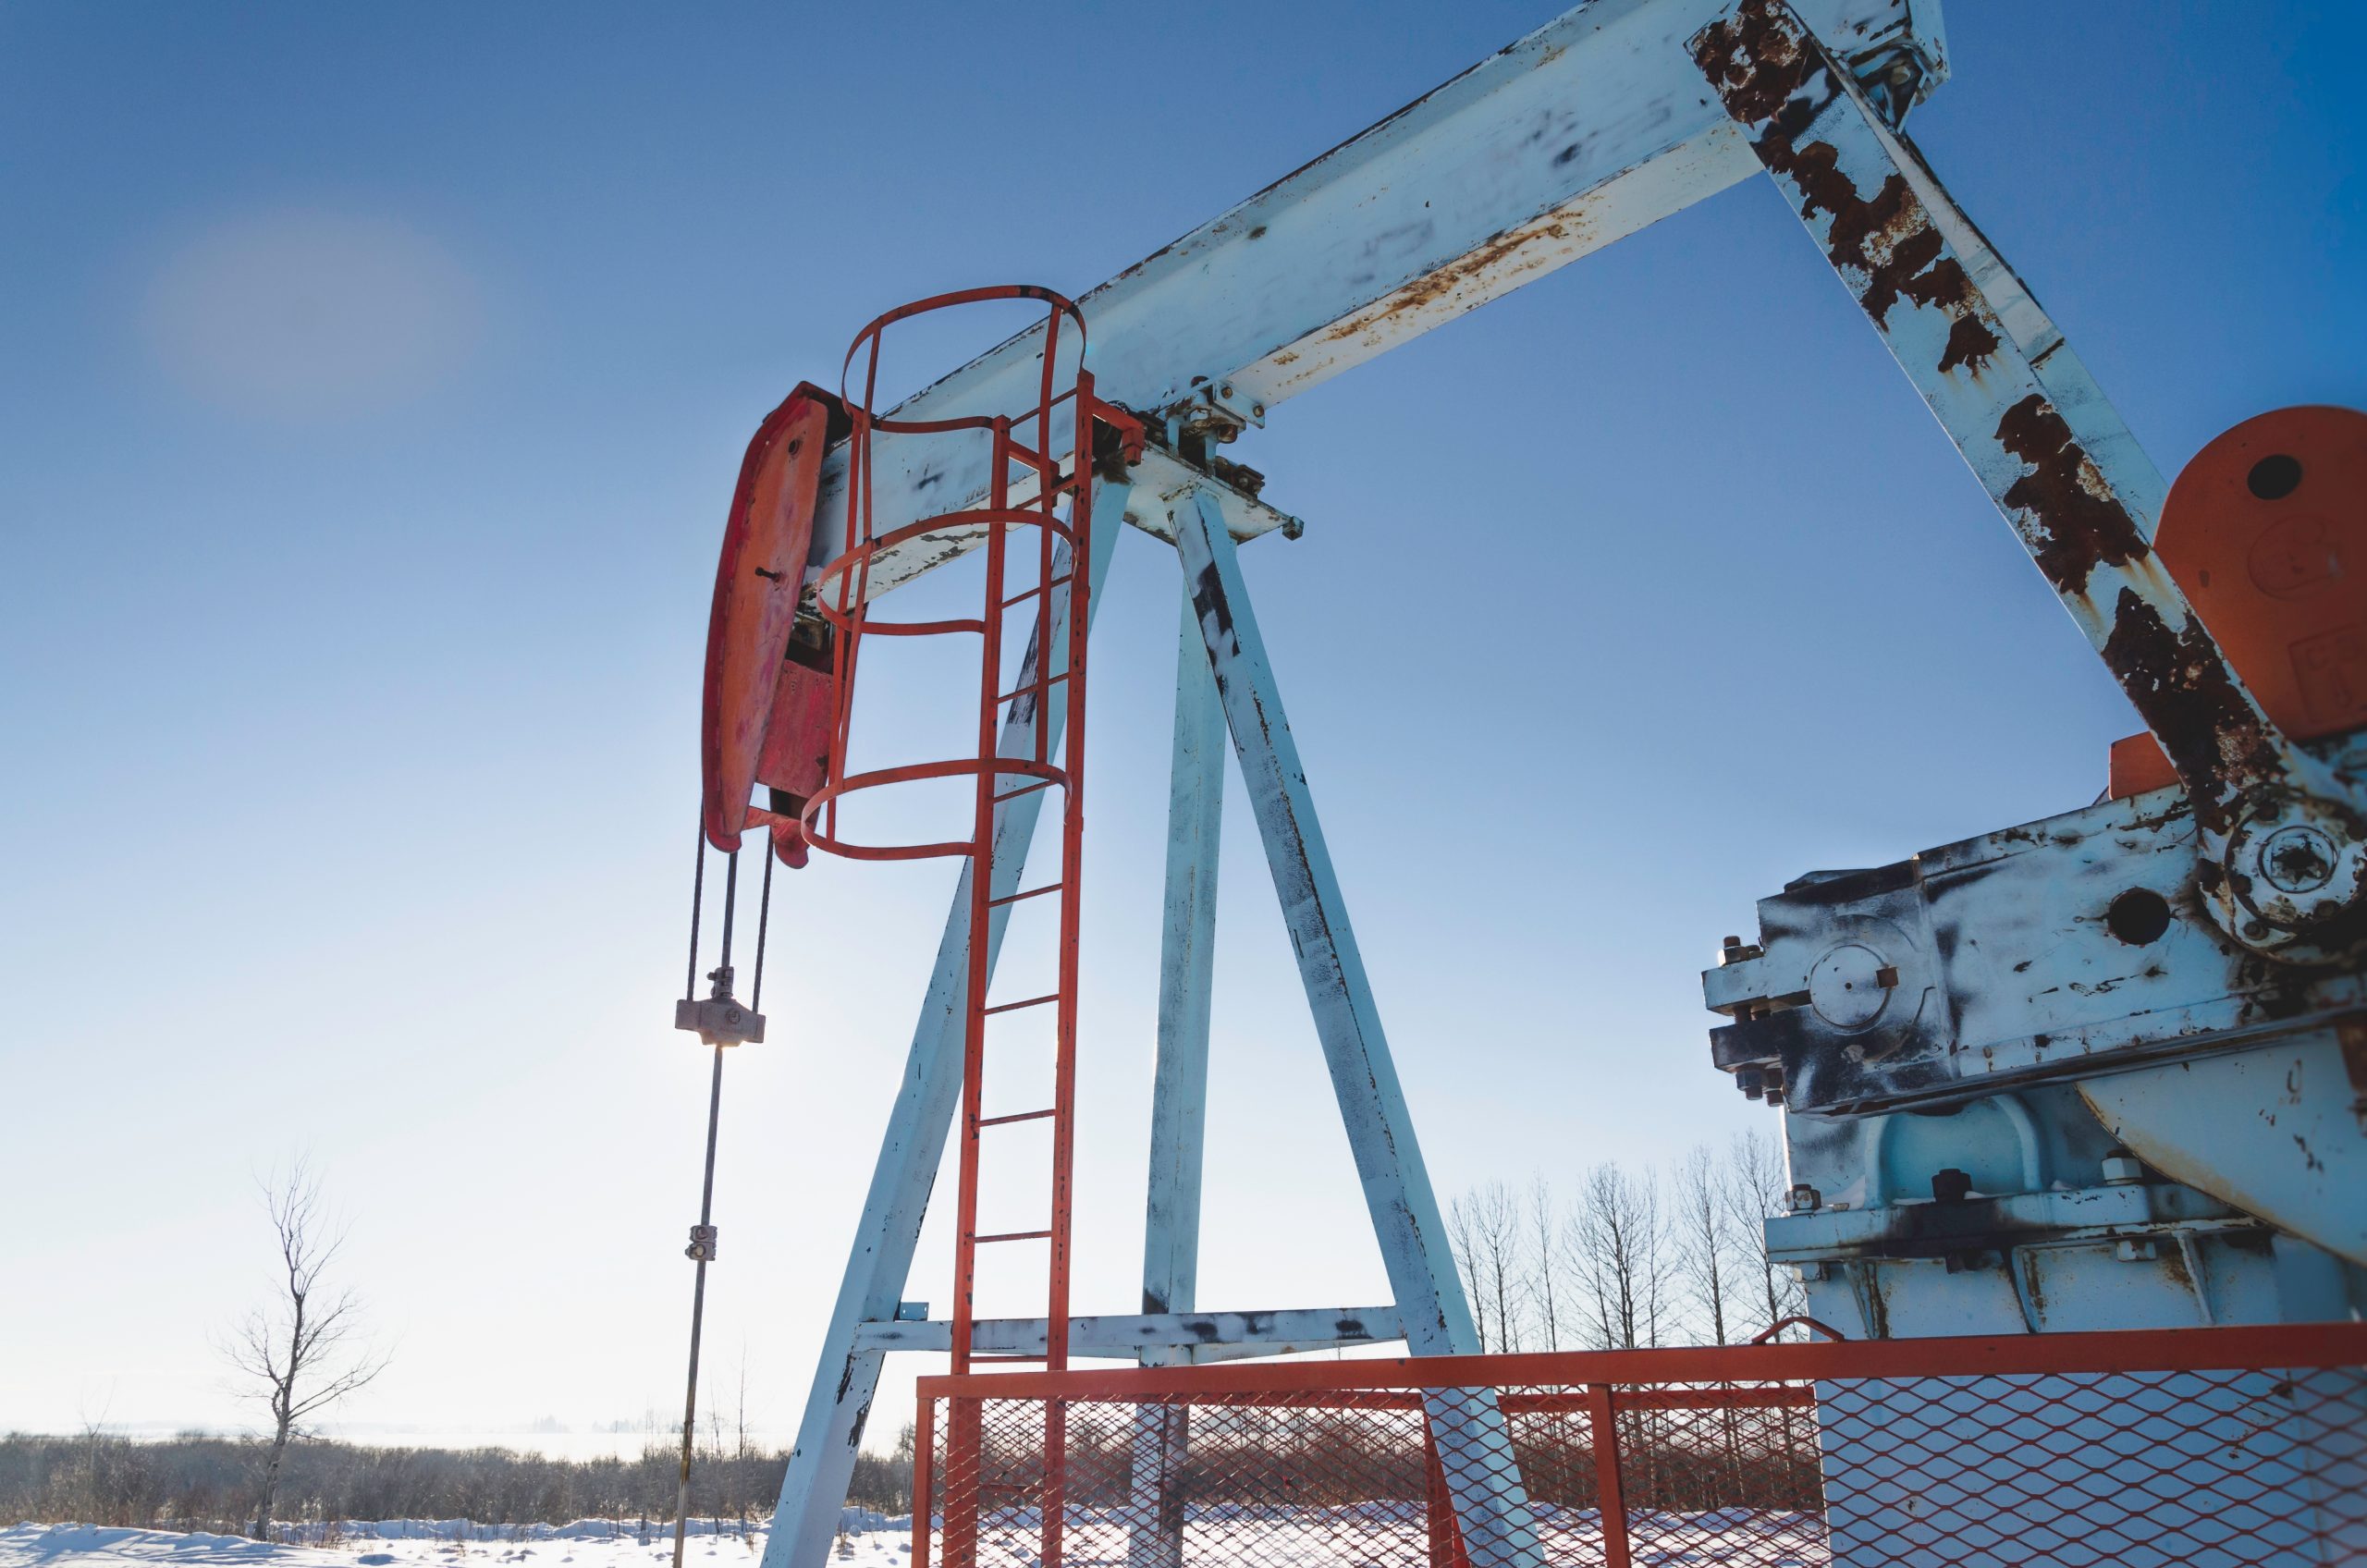 blue-and-red-oil-well-machinery-in-rural-alberta-c-2021-08-31-22-42-18-utc